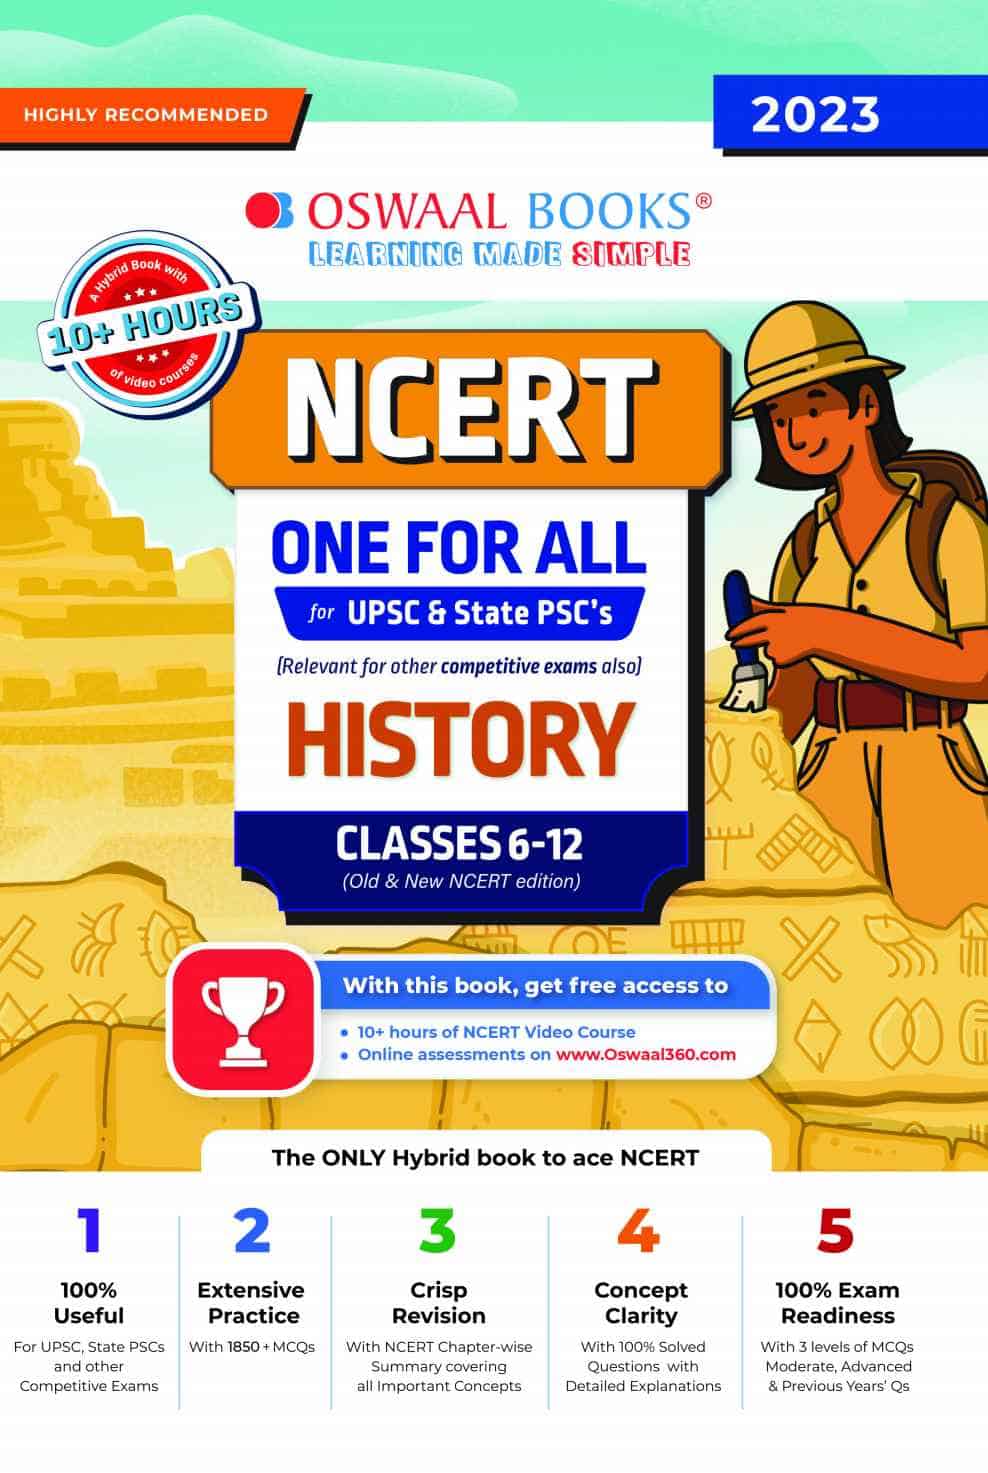 Oswaal NCERT One For All History Class 6-12 for UPSC & State PSC